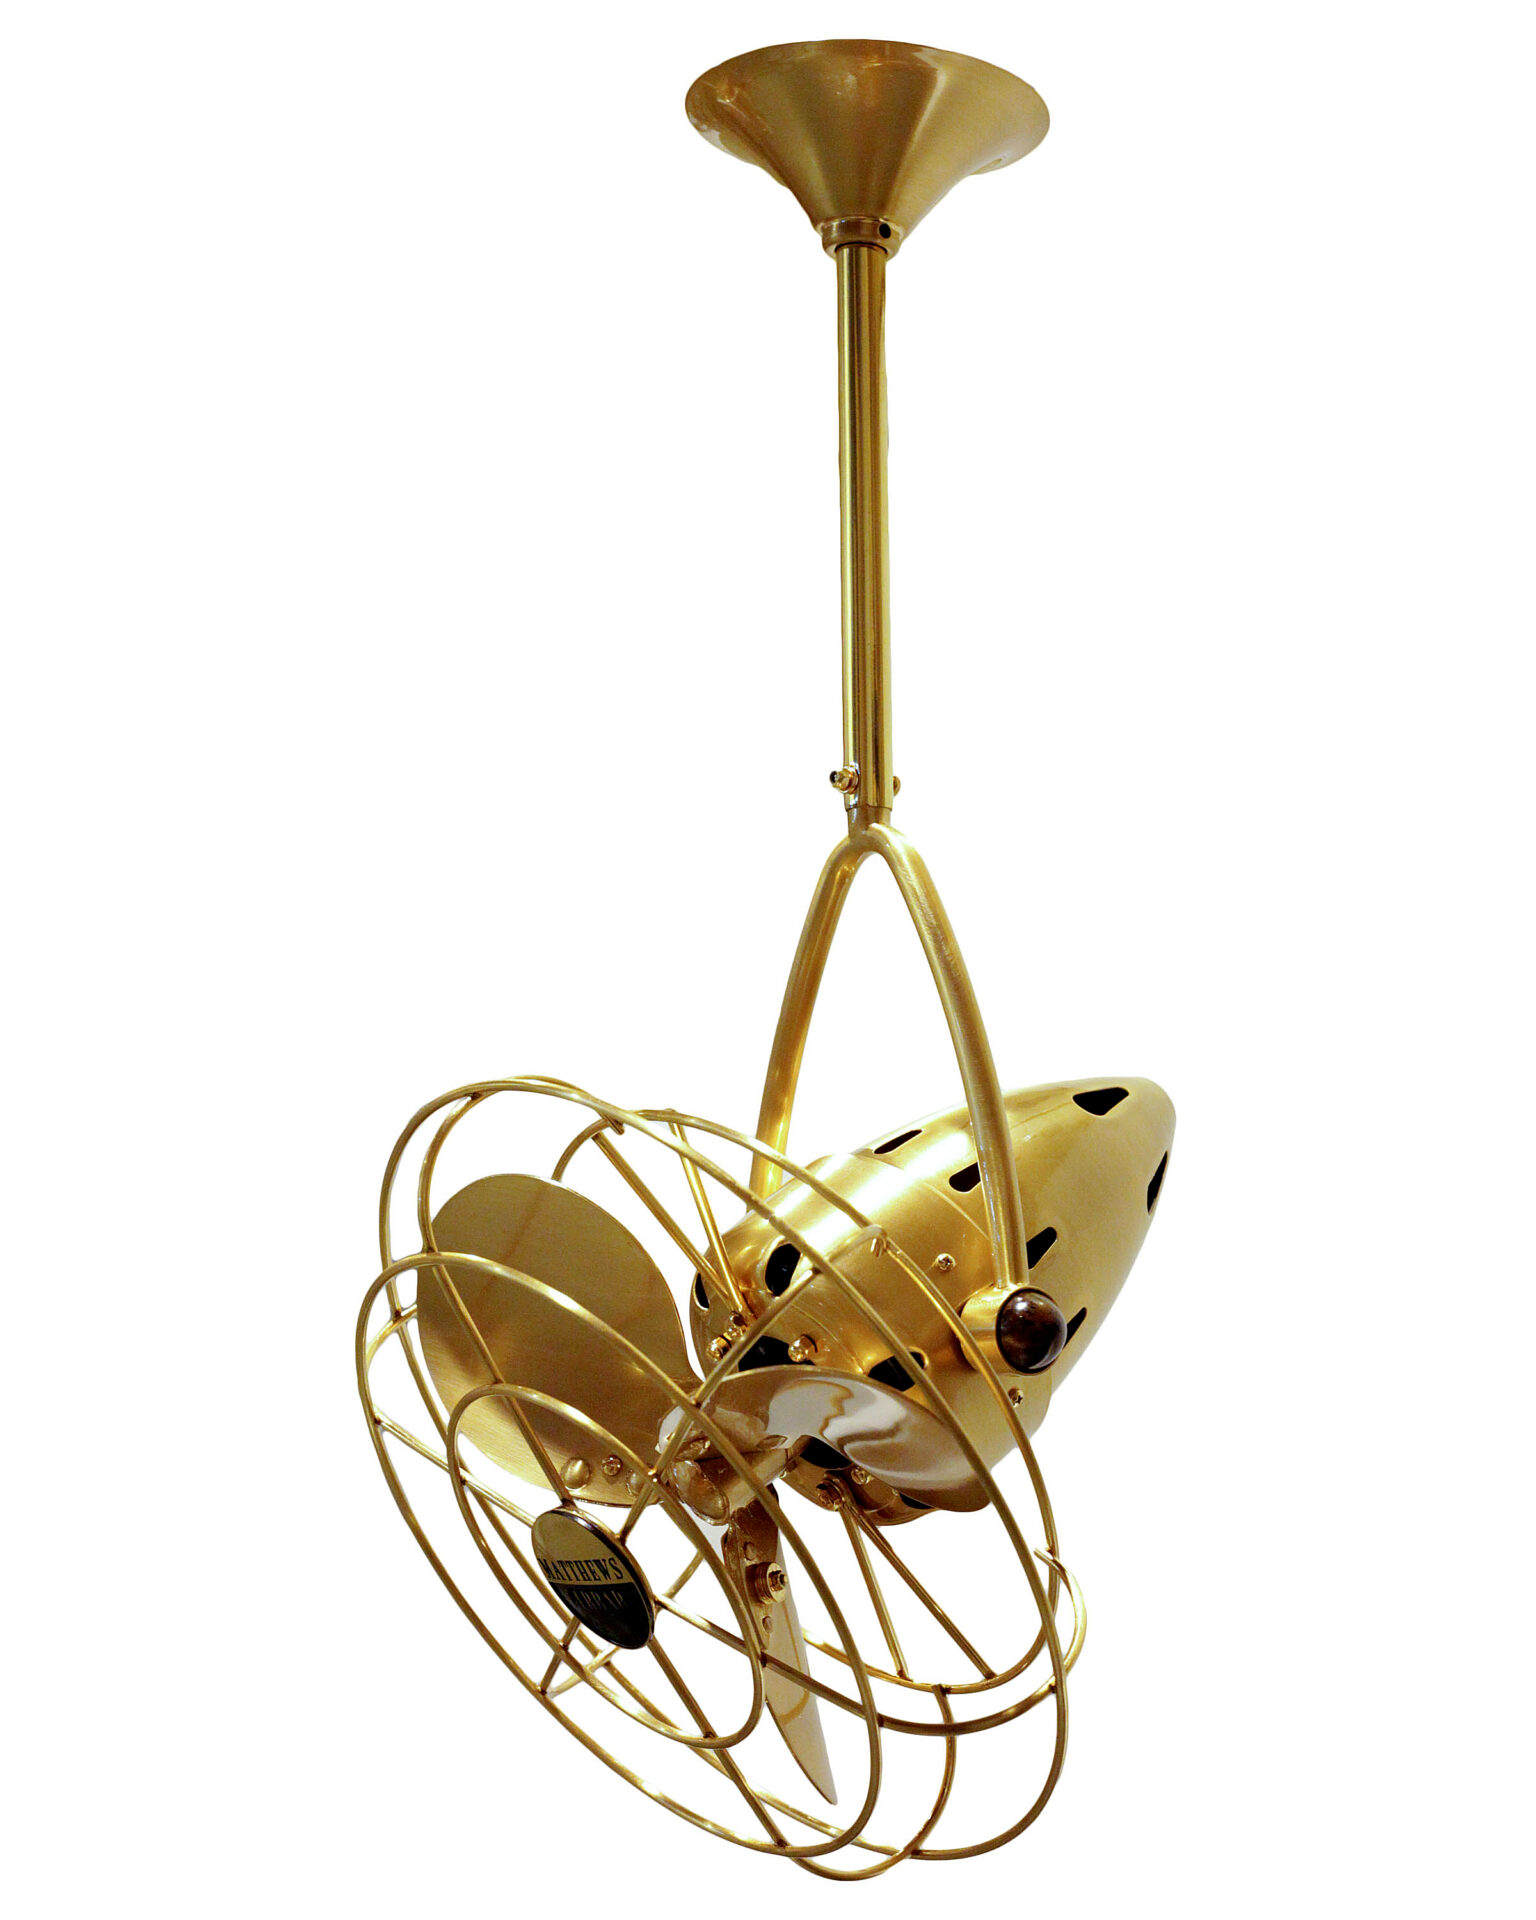 Jarold Direcional Ceiling Fan in Brushed Brass Finish with Metal blades with Decorative Guard